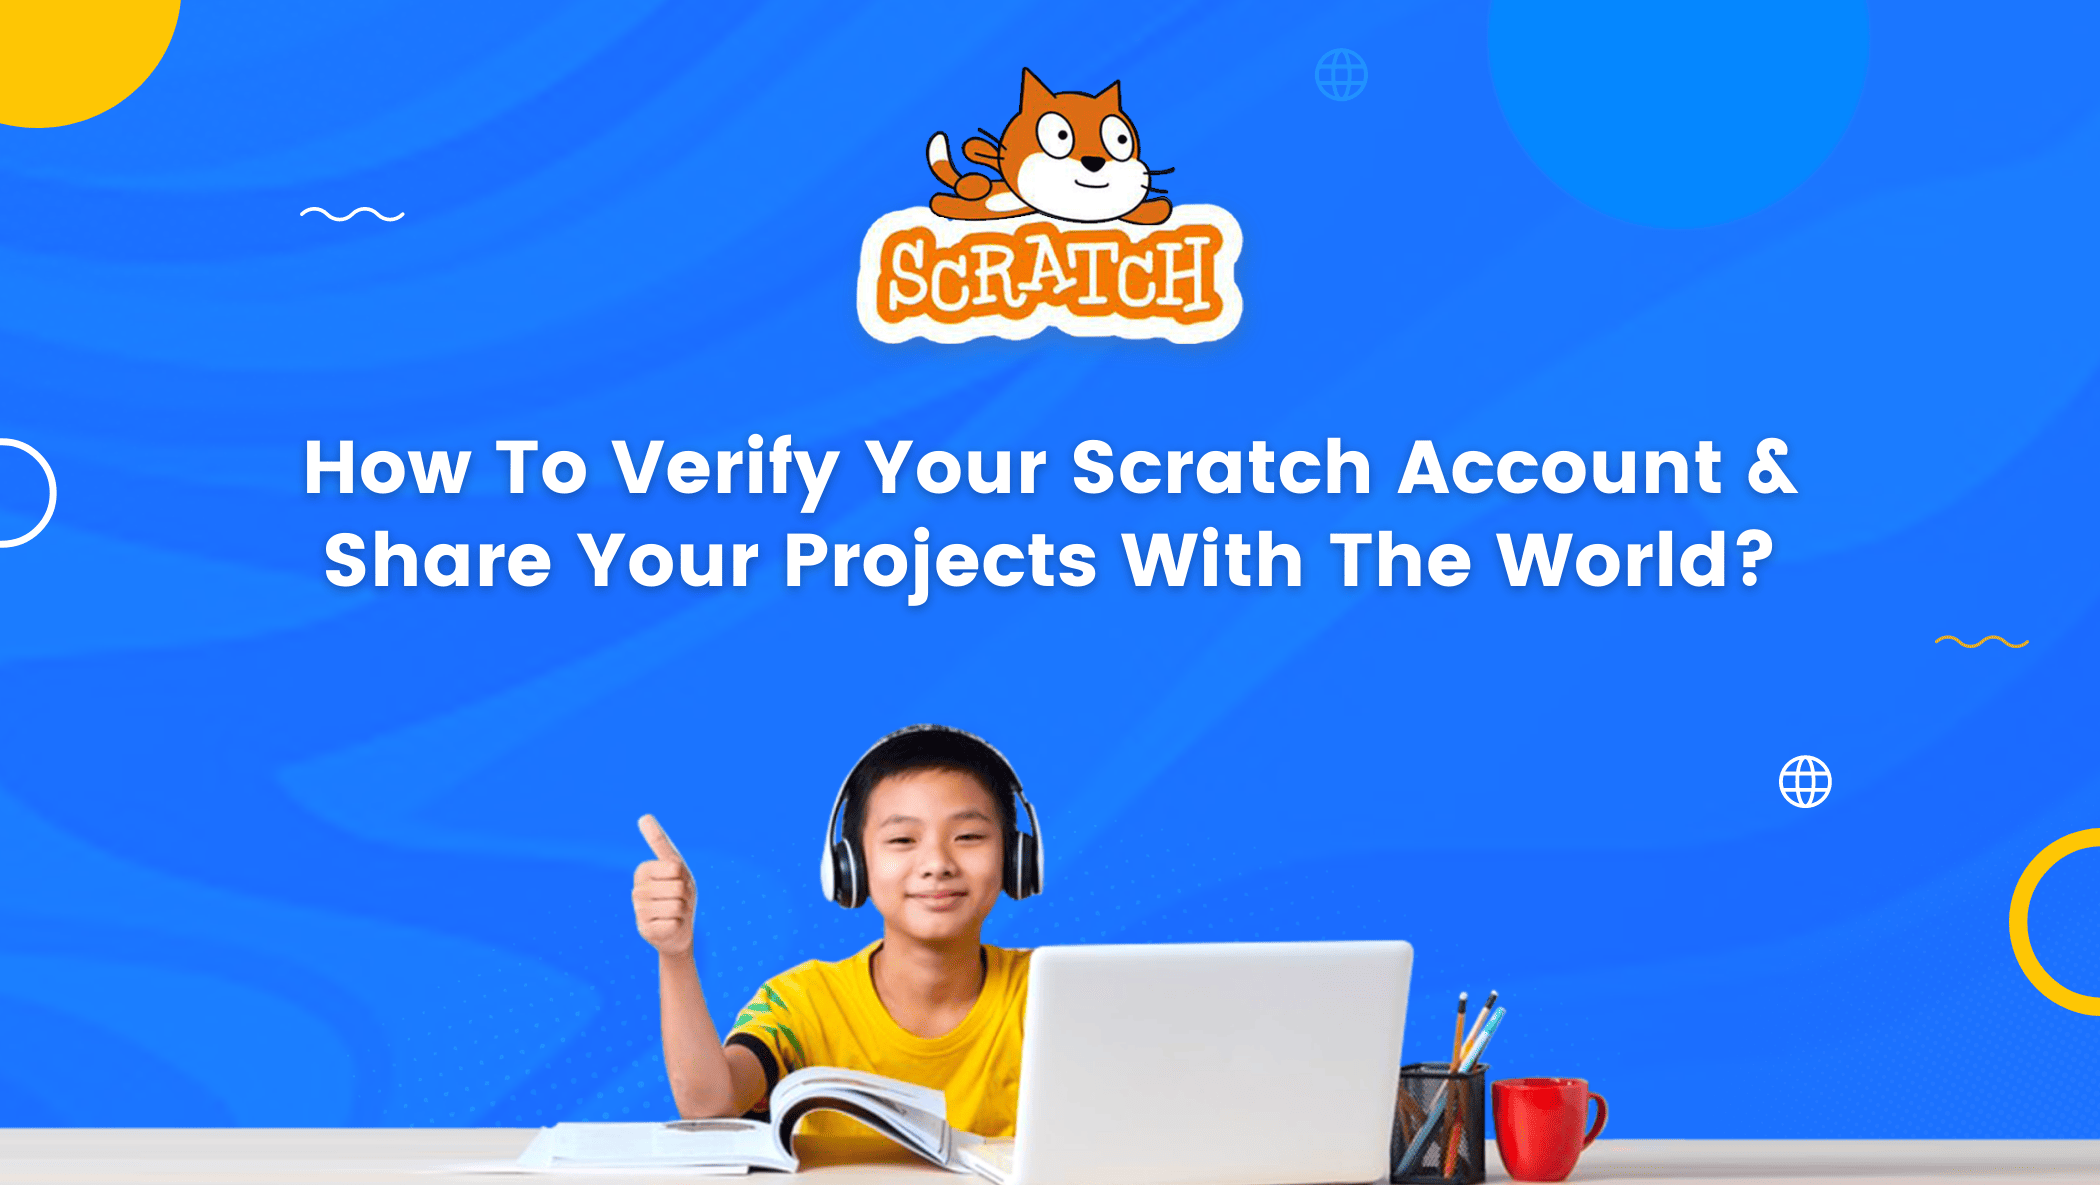 How To Verify Your Scratch Account & Share Your Projects With The World